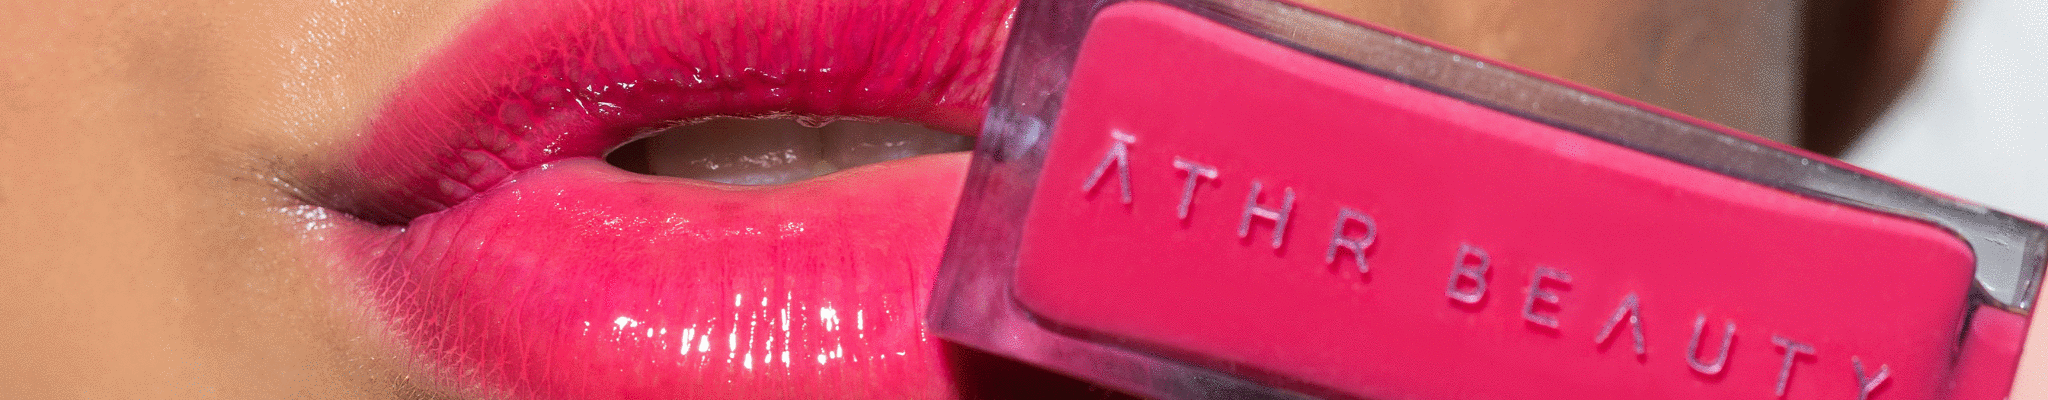 Closeup image of model wearing ATHR Beauty's lip product.